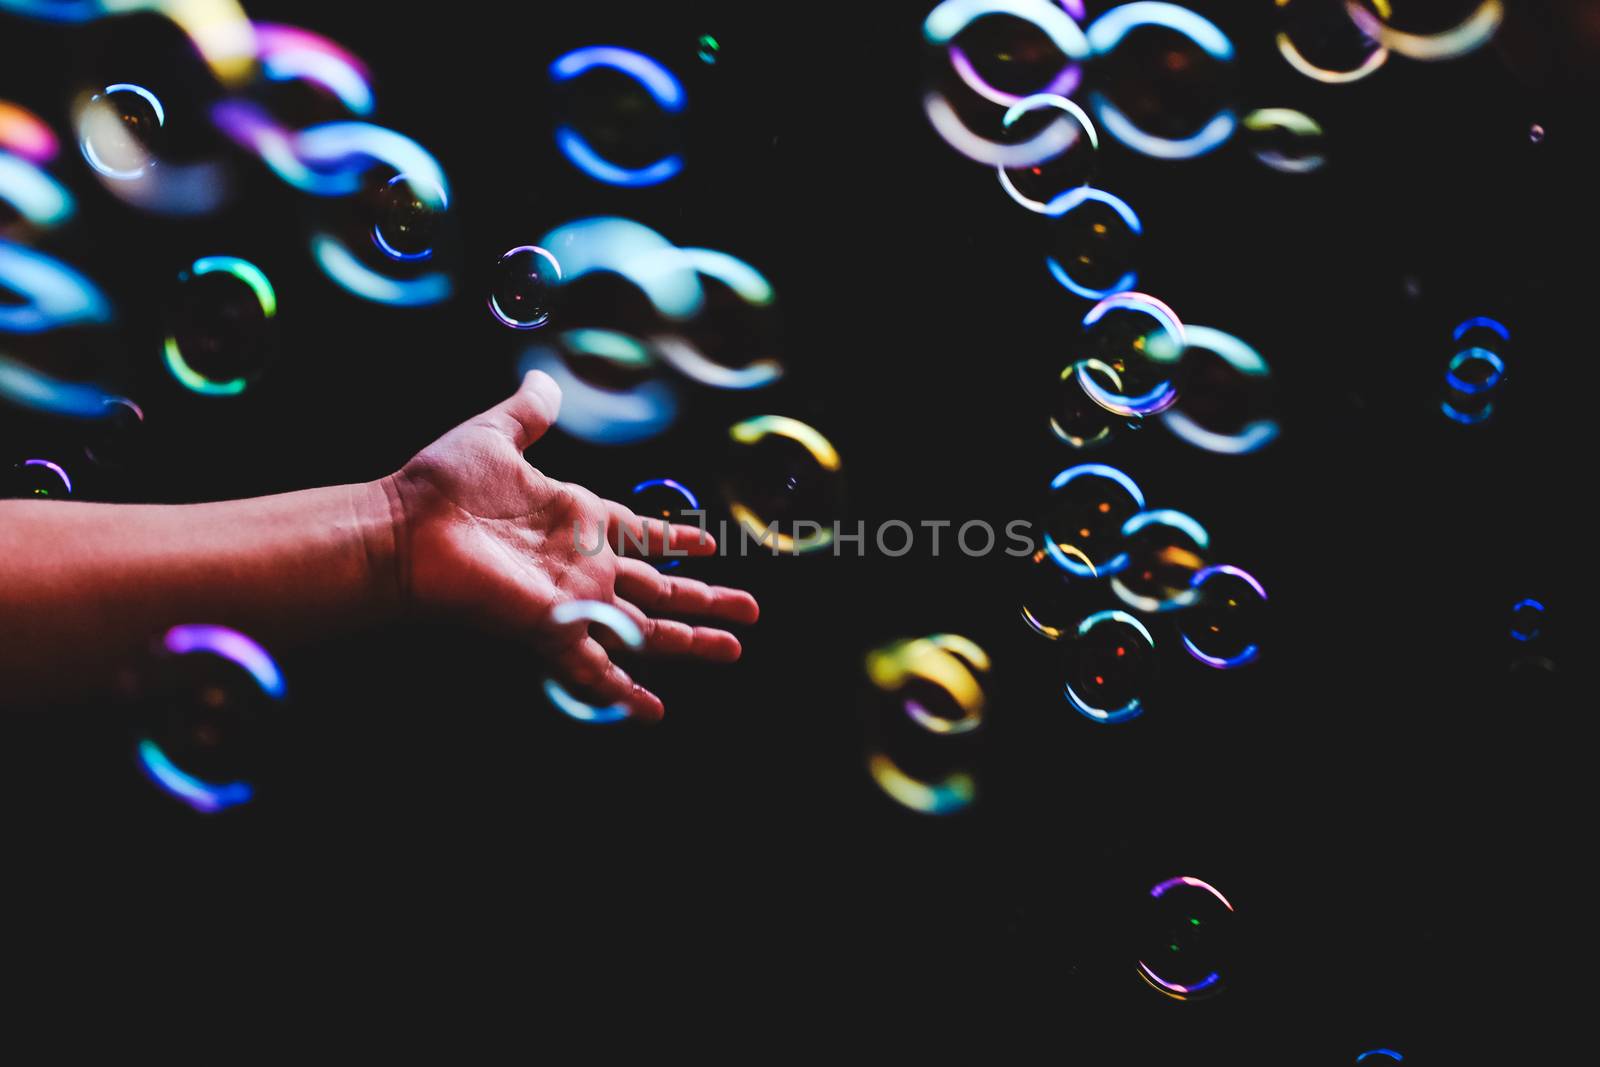 Hand trying to catch colorful bubbles over dark background by mikelju